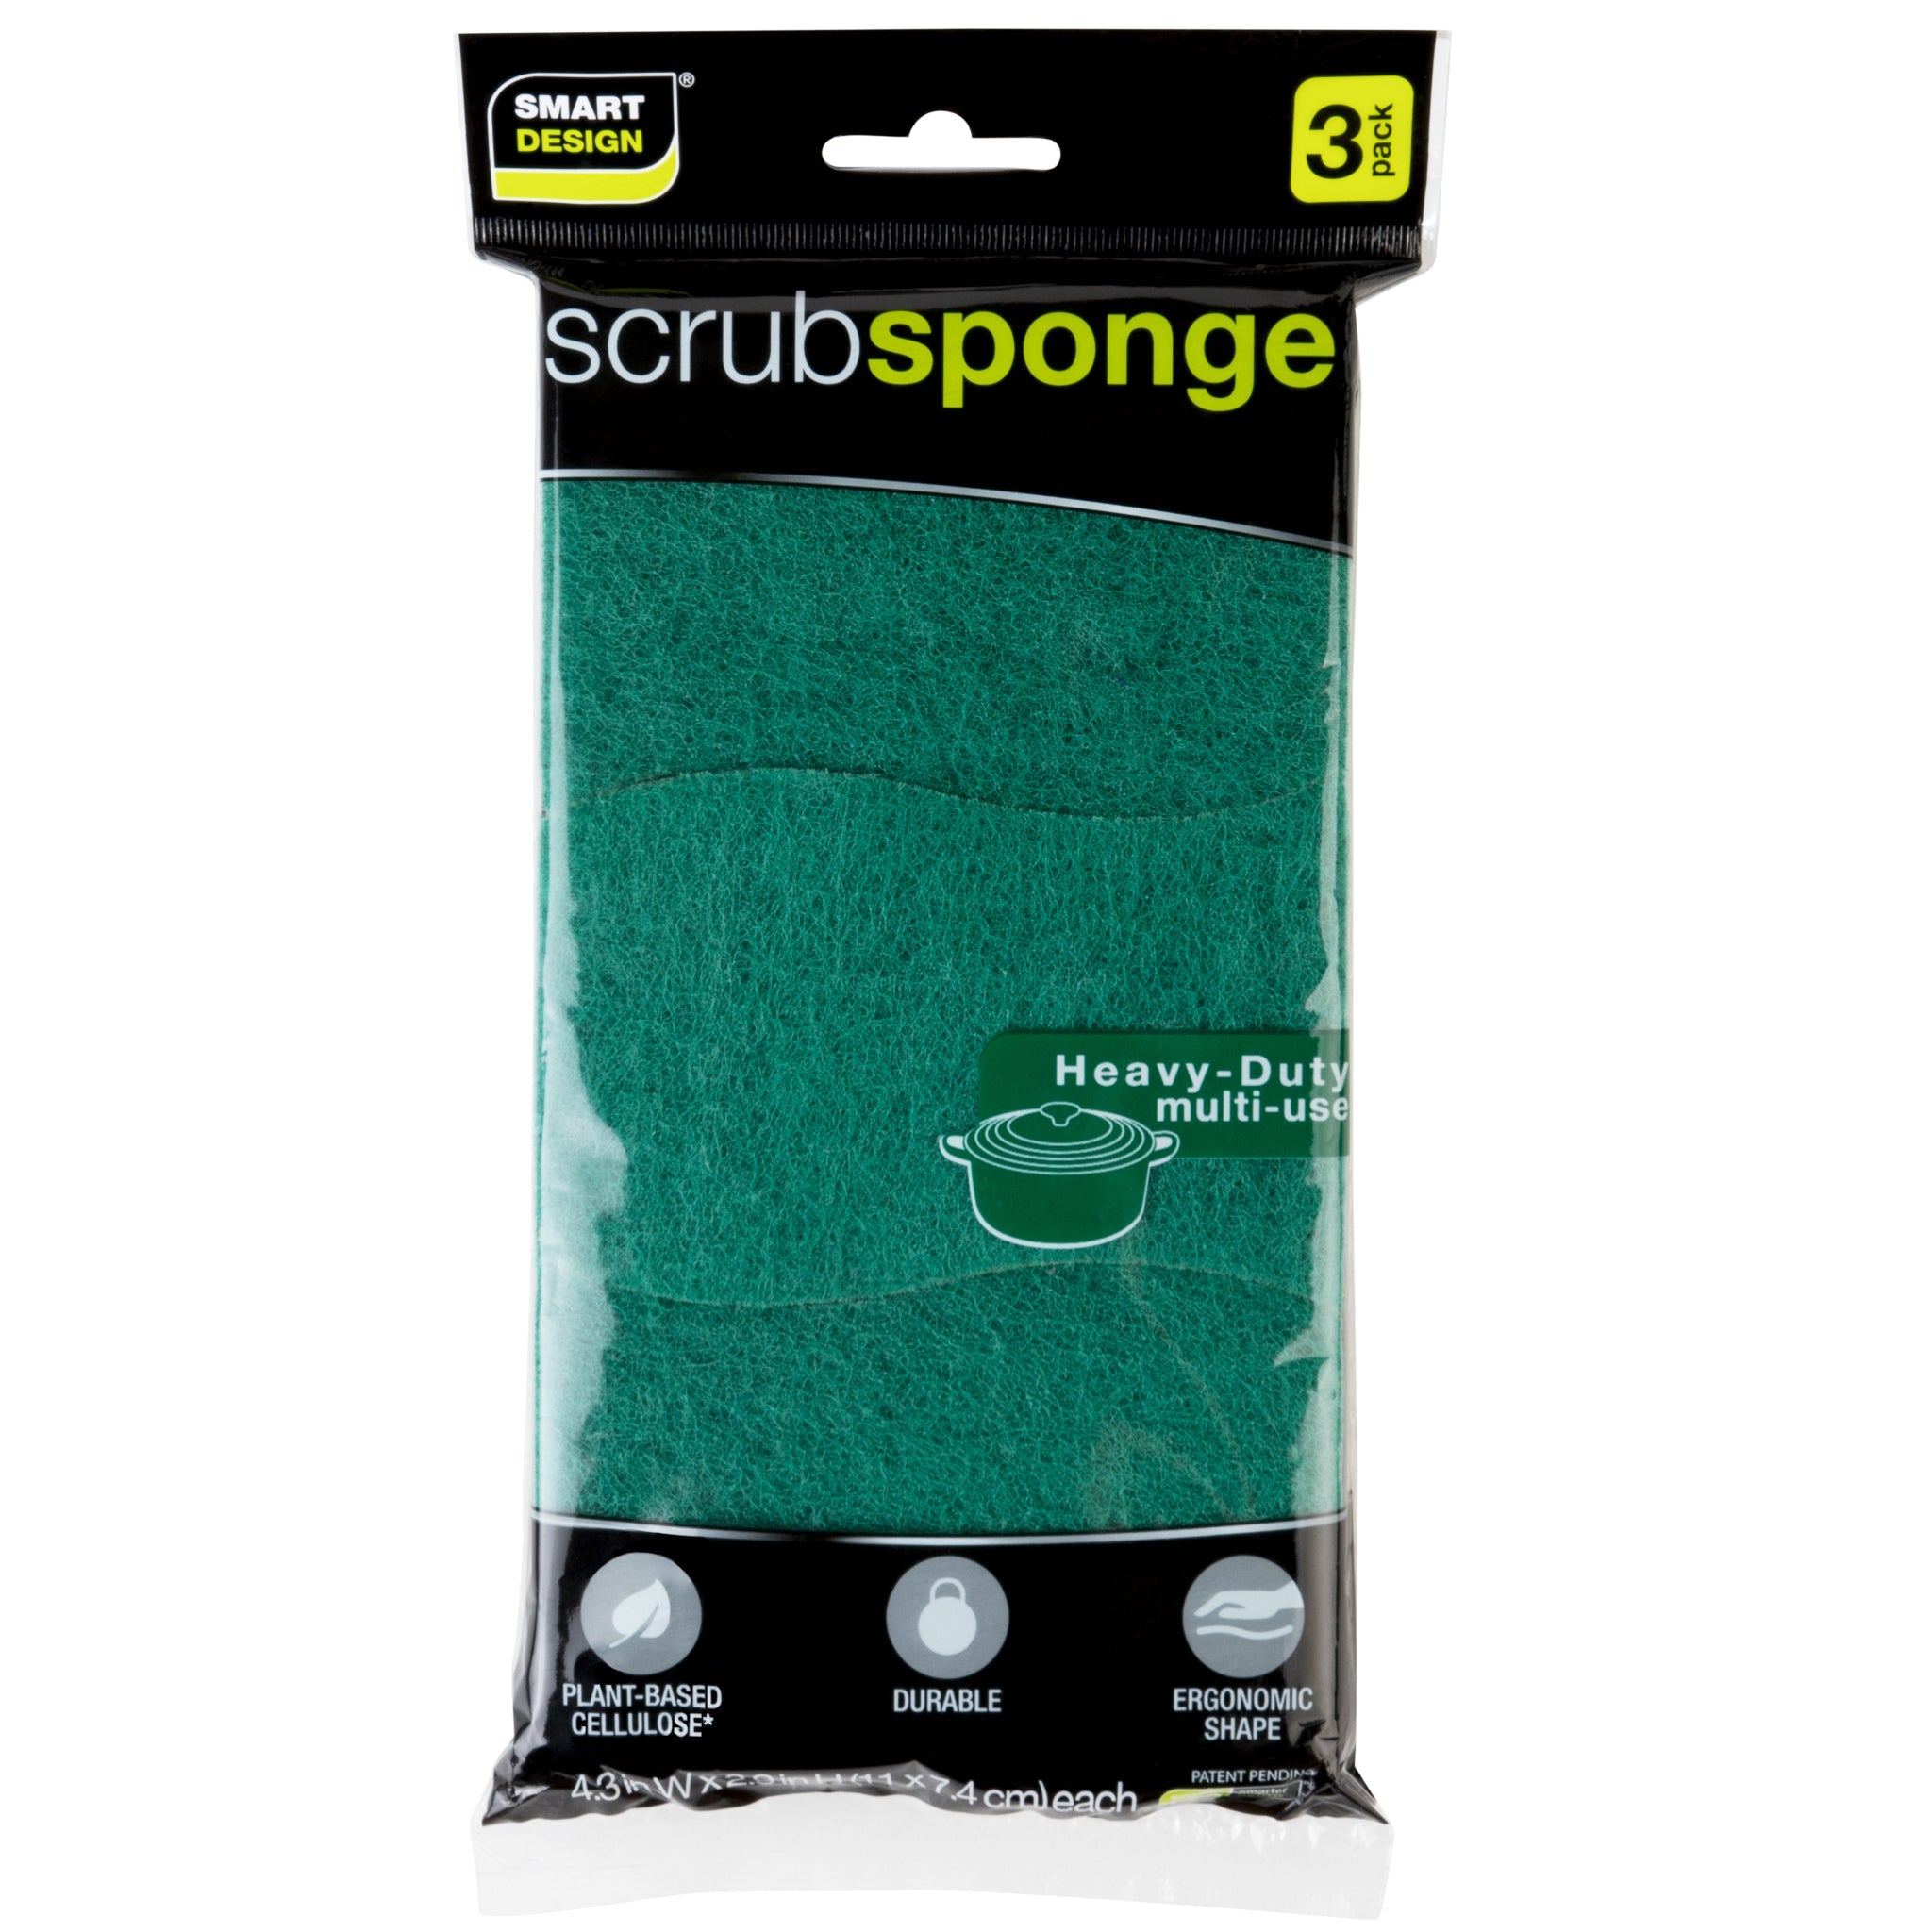 Smart Design Heavy Duty Scrub Sponge with Bamboo Odorless Rayon Fiber - Set of 9 - Ultra Absorbent - Soft and Metallic Scrub - Cleaning, Dishes, and H